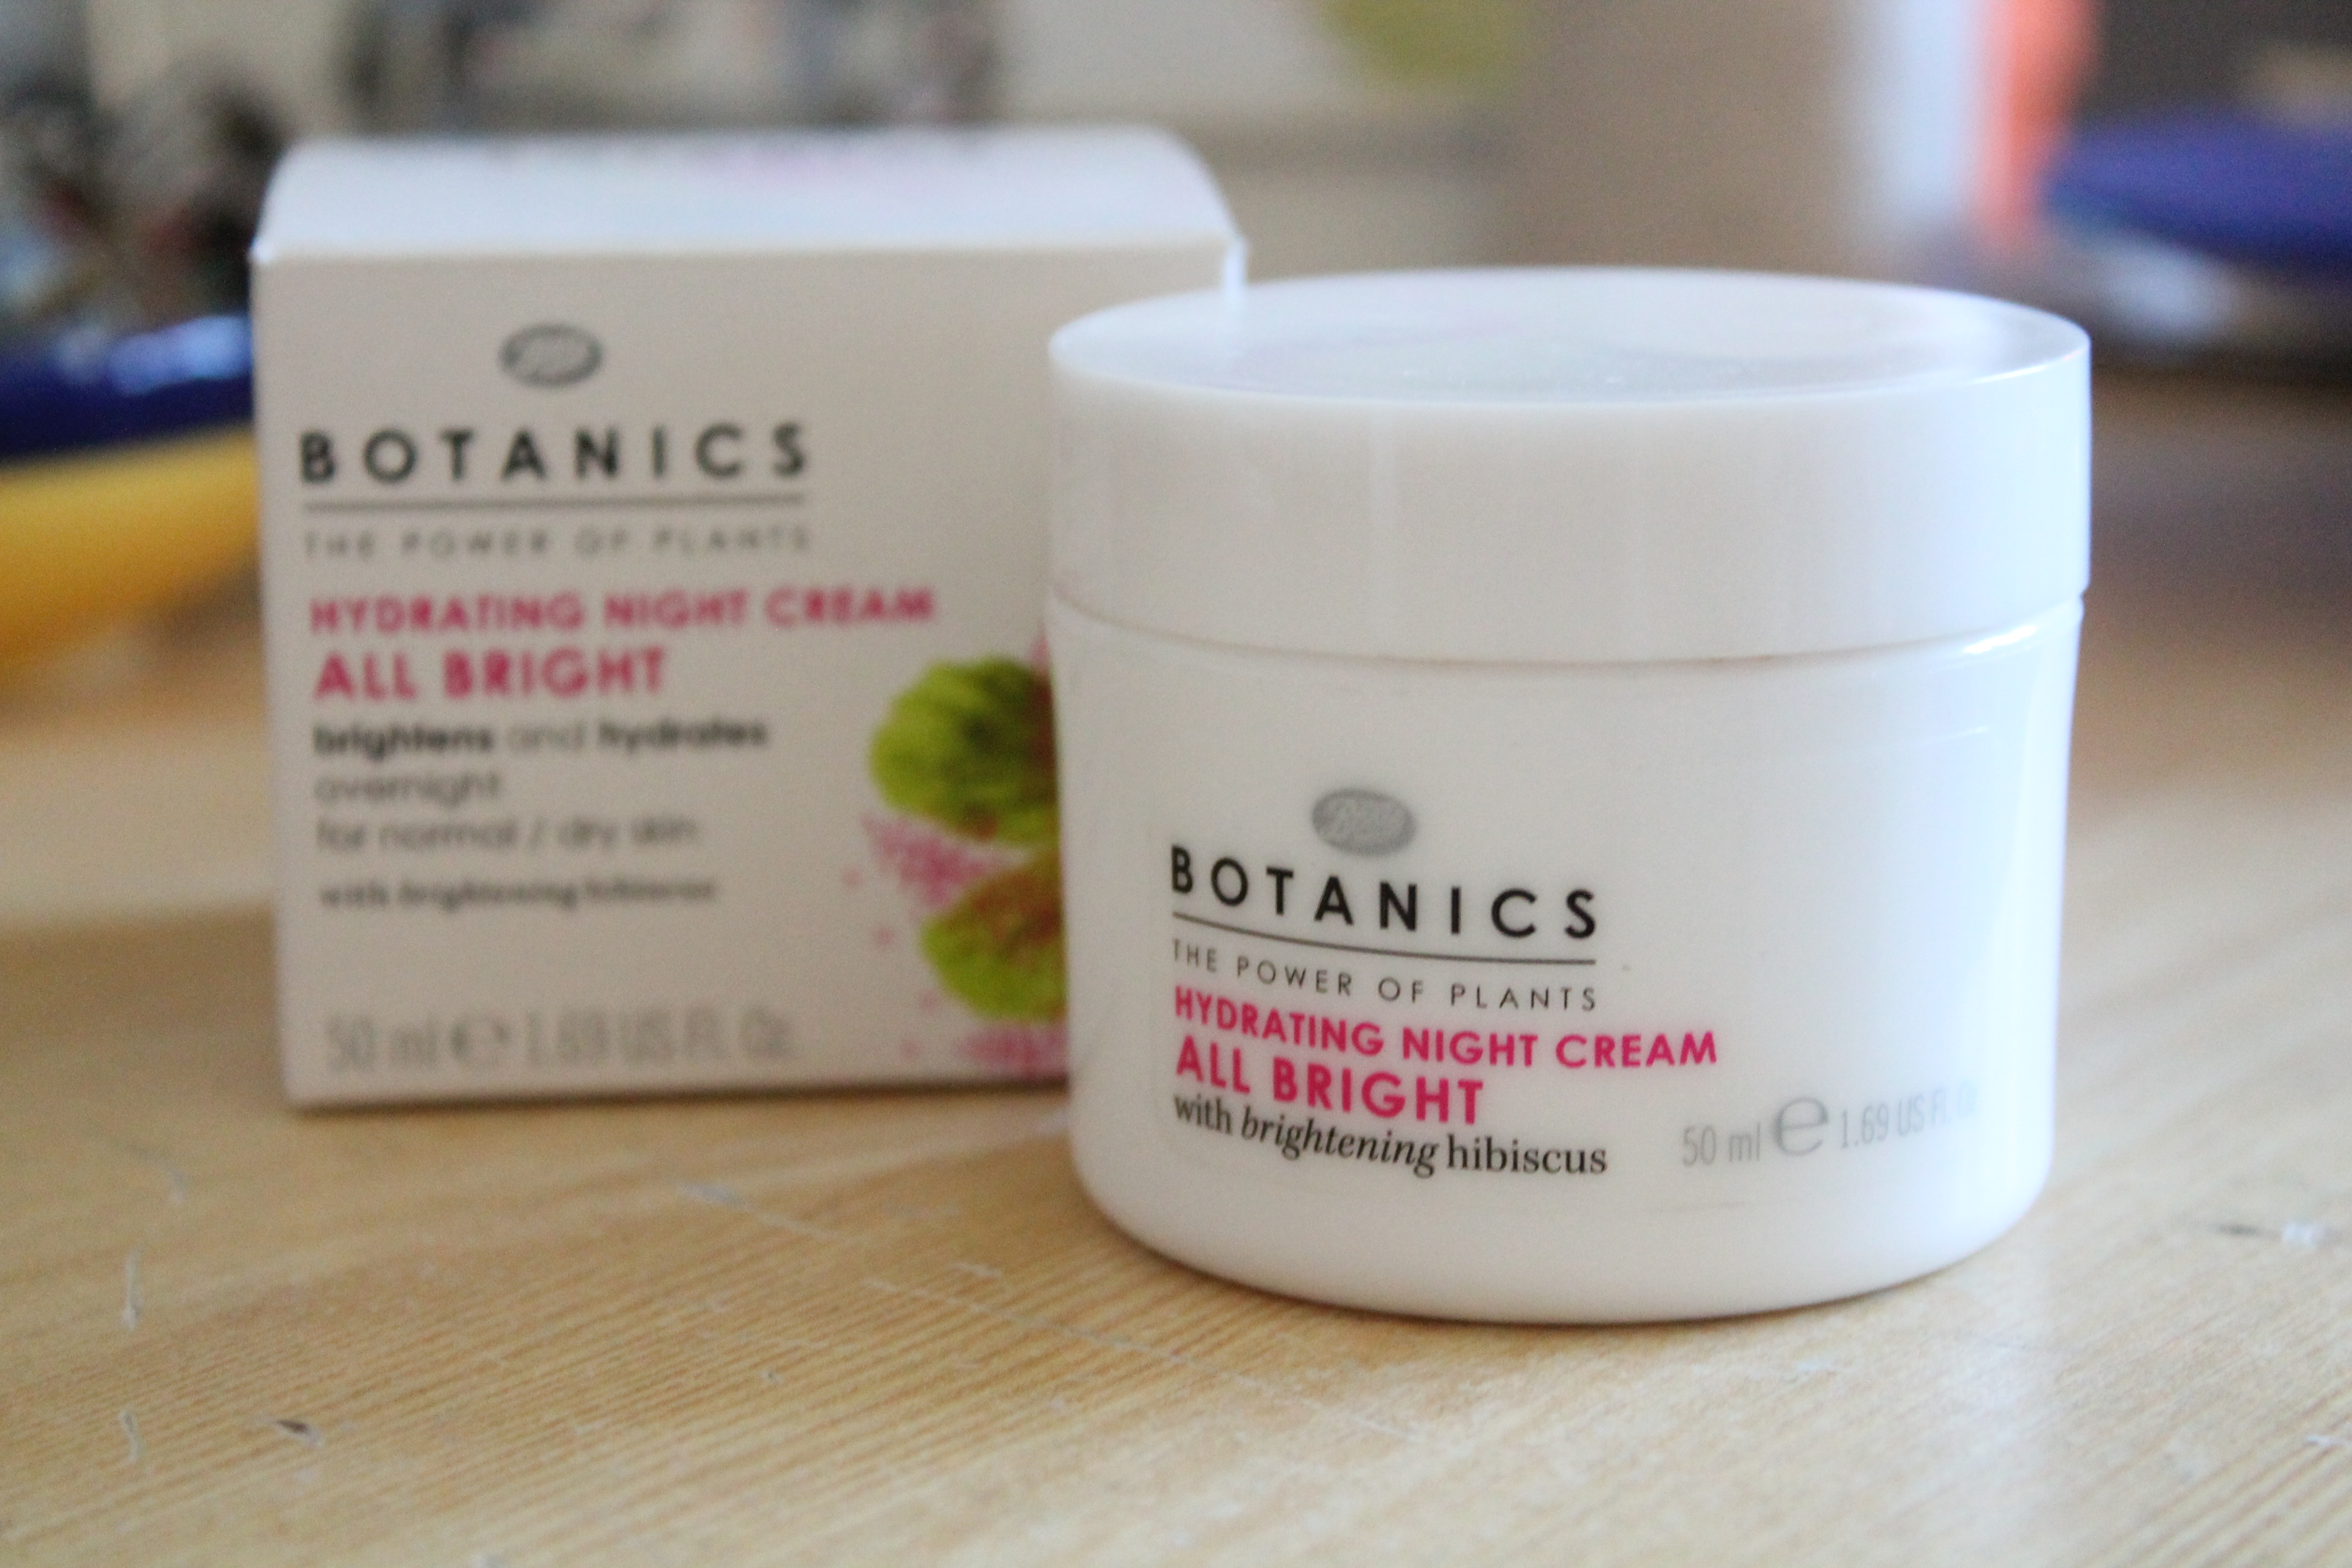 cafetaria spiegel leeftijd Botanics “All Bright” Hydrating Day and Night Cream Review